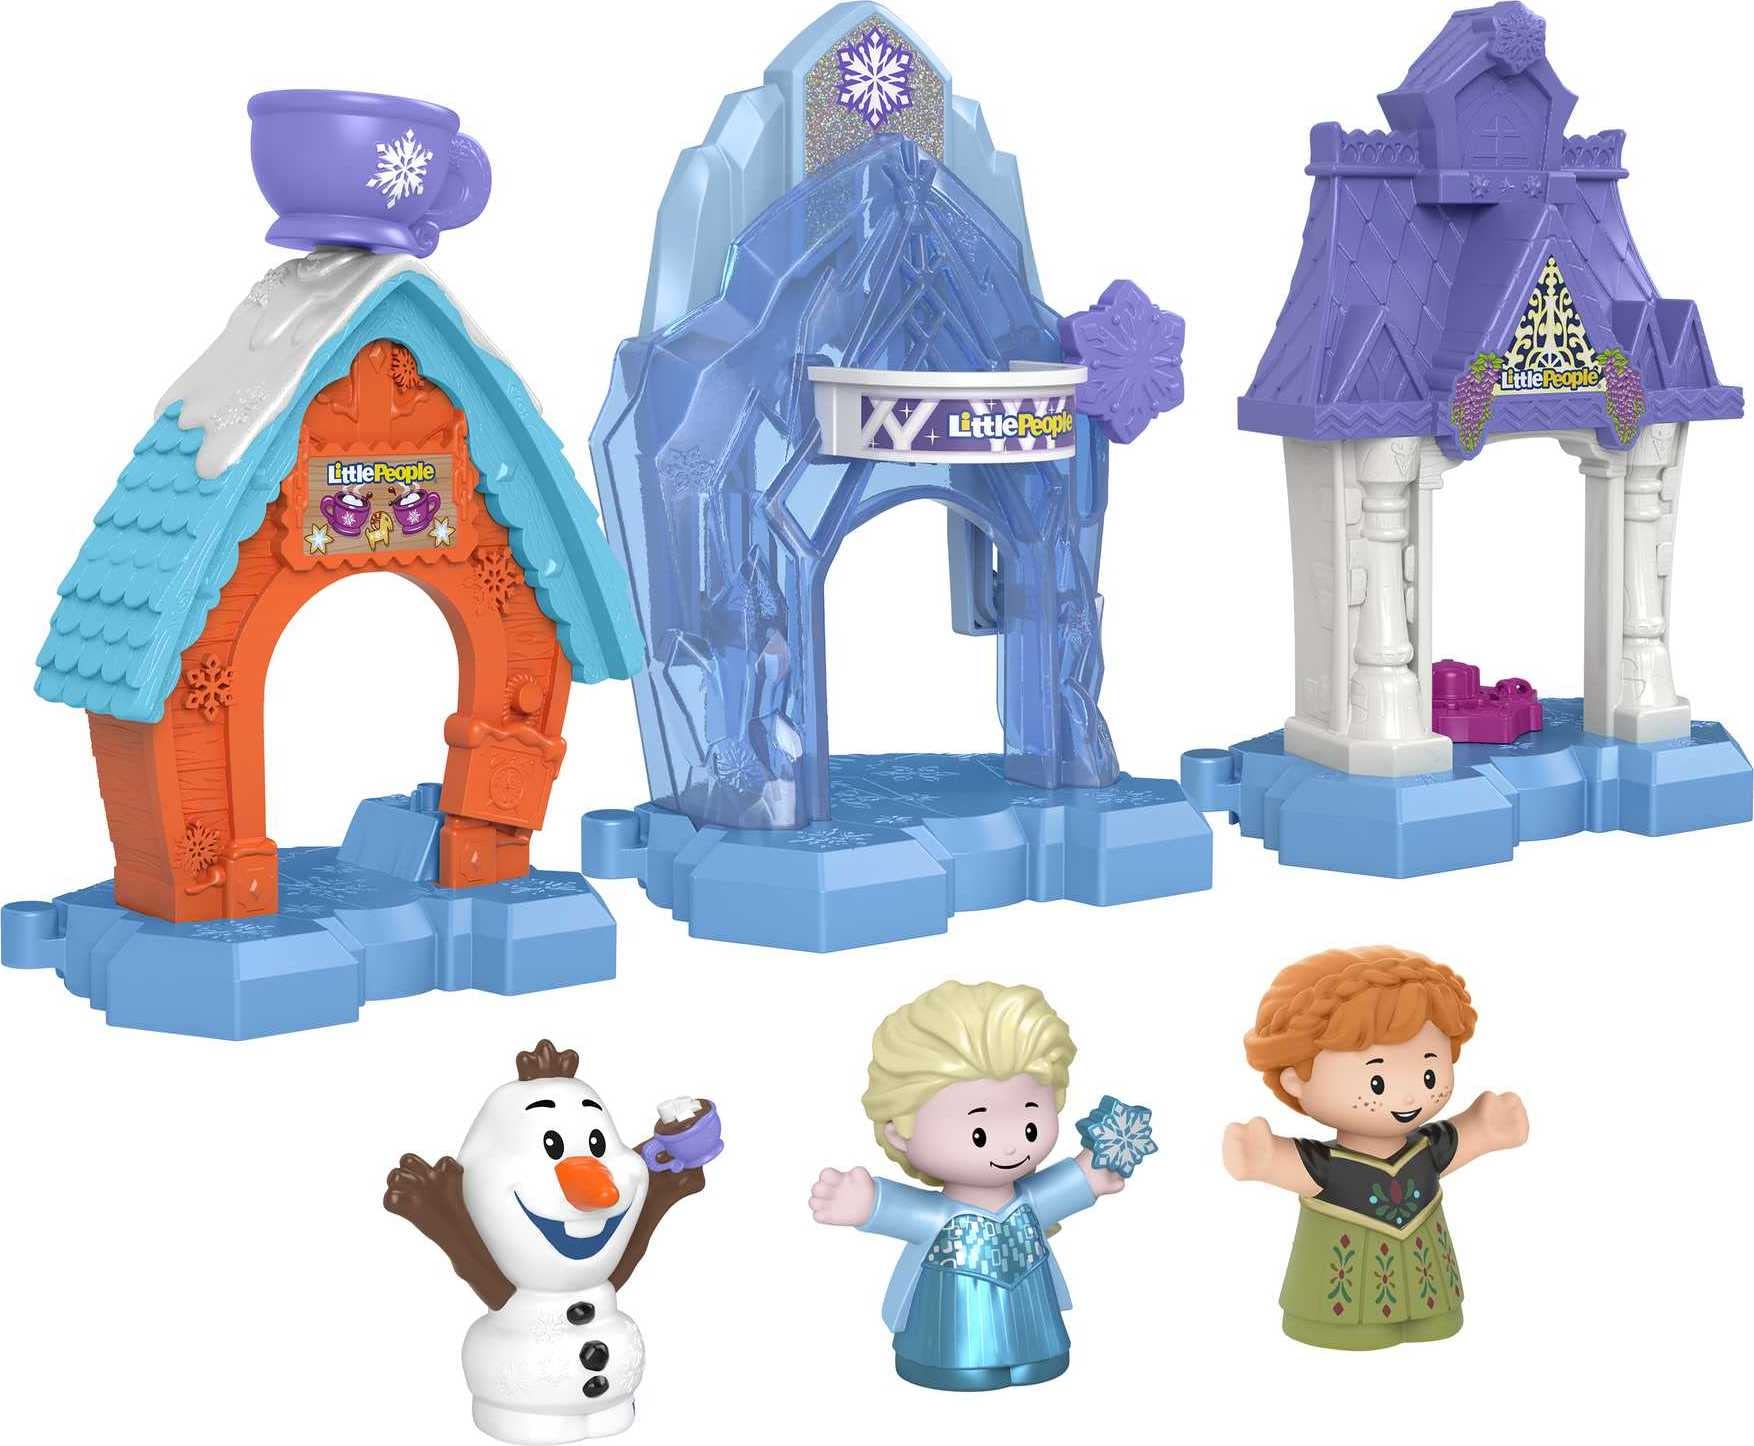 Fisher-Price Disney Frozen Little People Snowflake Village Toddler Playset $10.90 + Free Shipping w/ Prime or on $25+